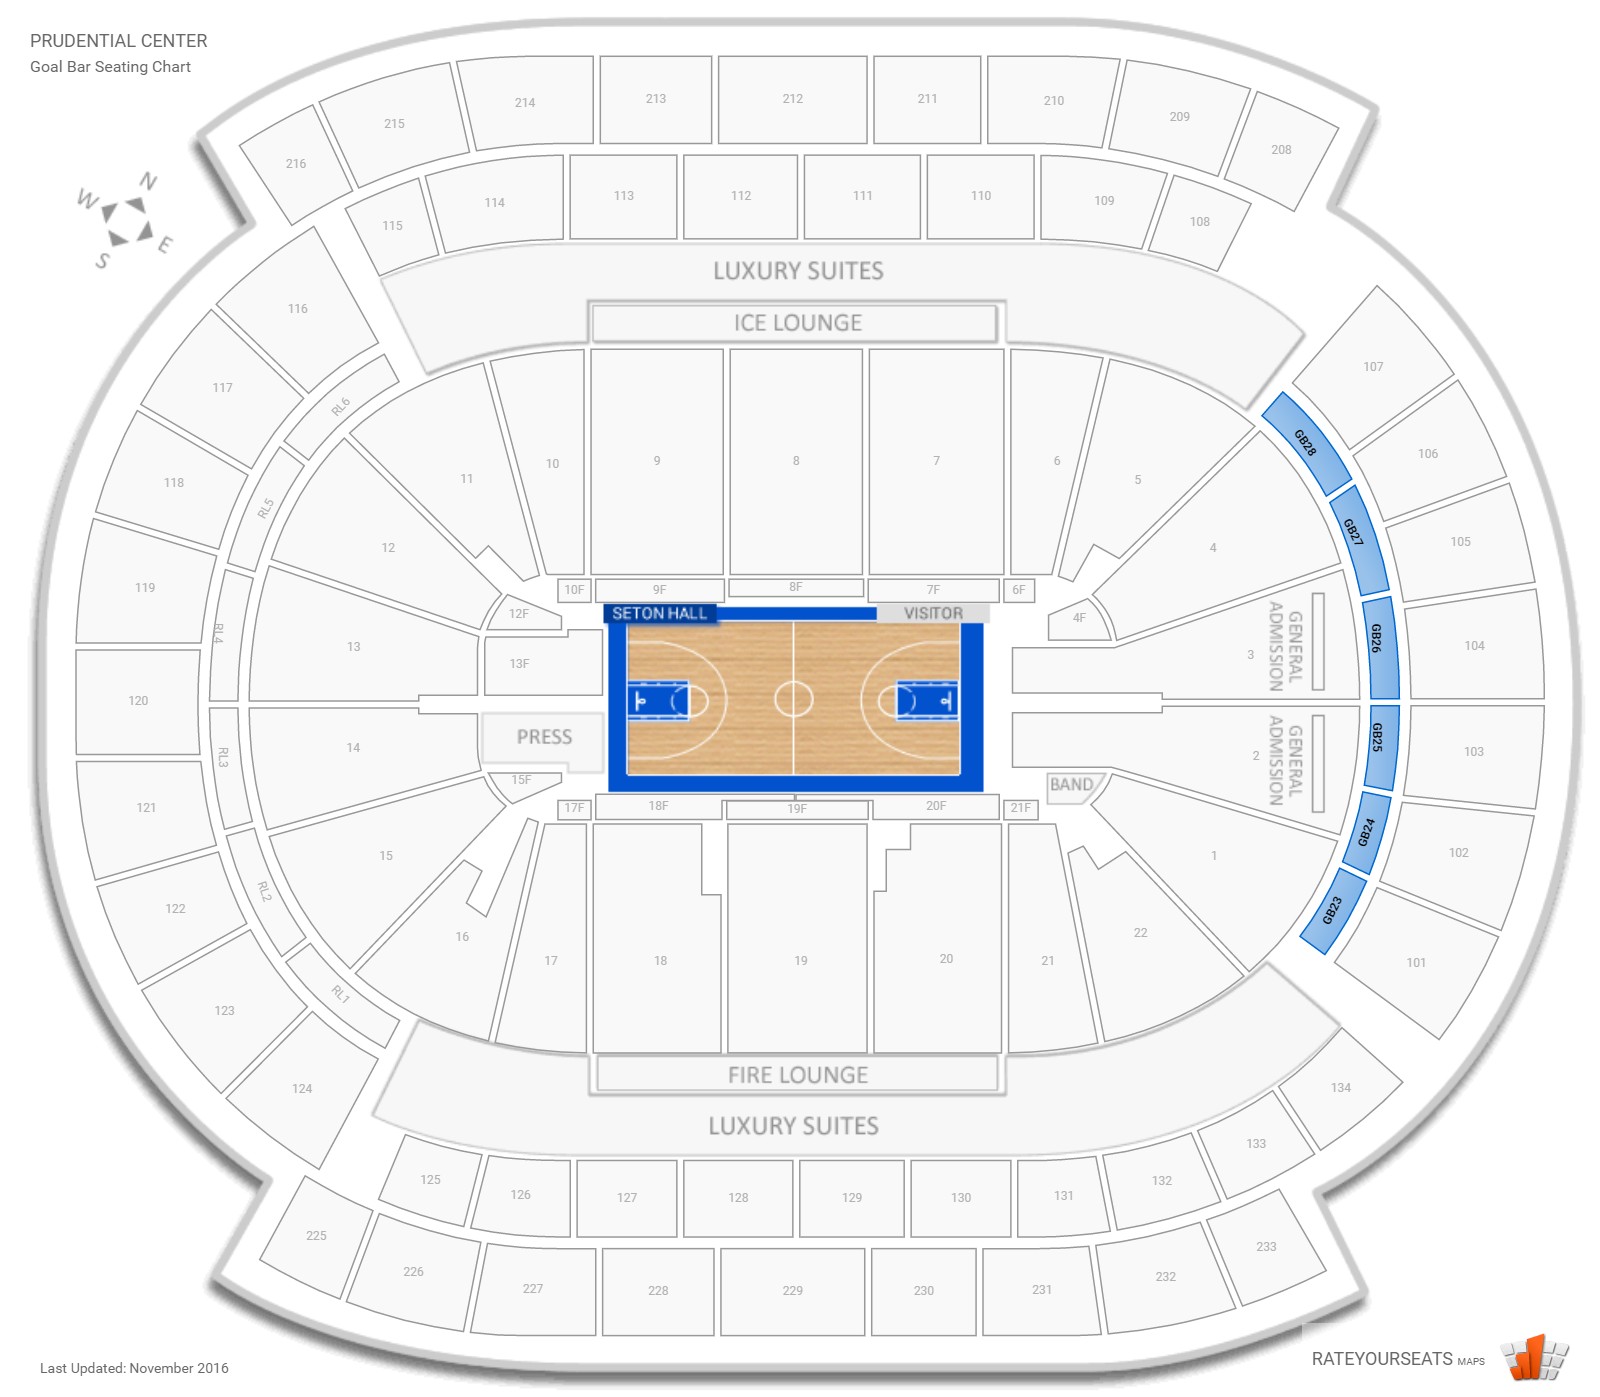 Prudential Center Newark Seating Chart